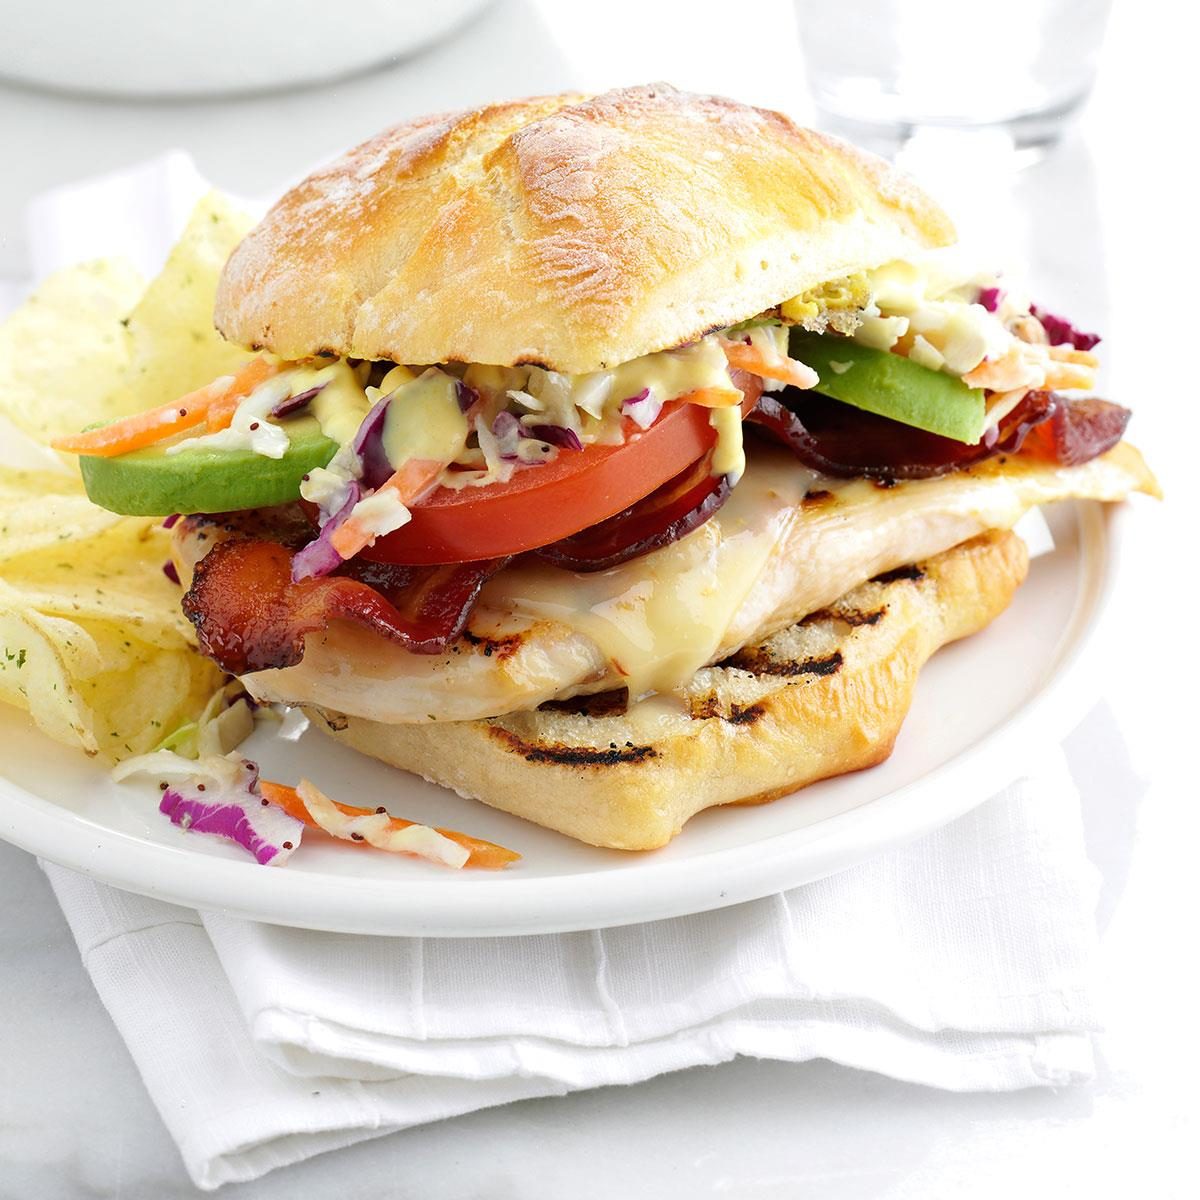 Loaded Grilled Chicken Sandwich Recipe How To Make It